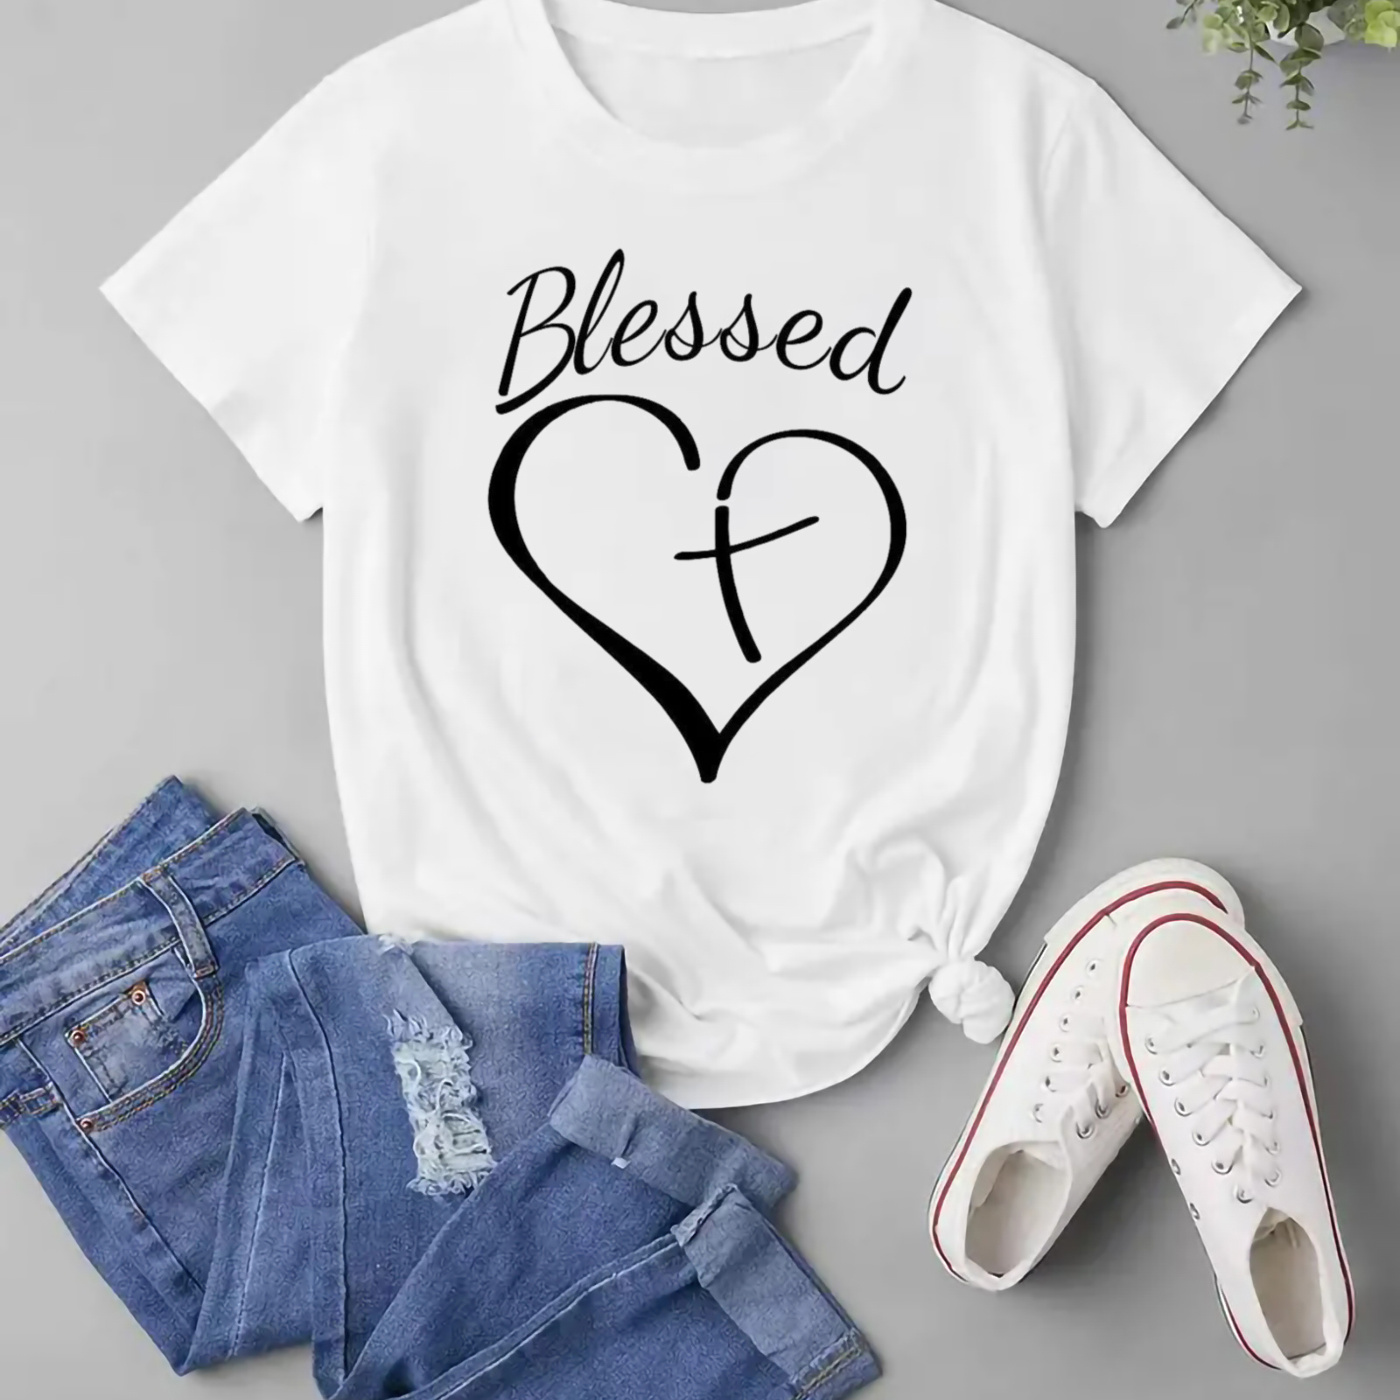 

Blessed Heart & Cross Print T-shirt, Crew Neck Short Sleeve T-shirt For Valentine's Day Gifts, Women's Clothing